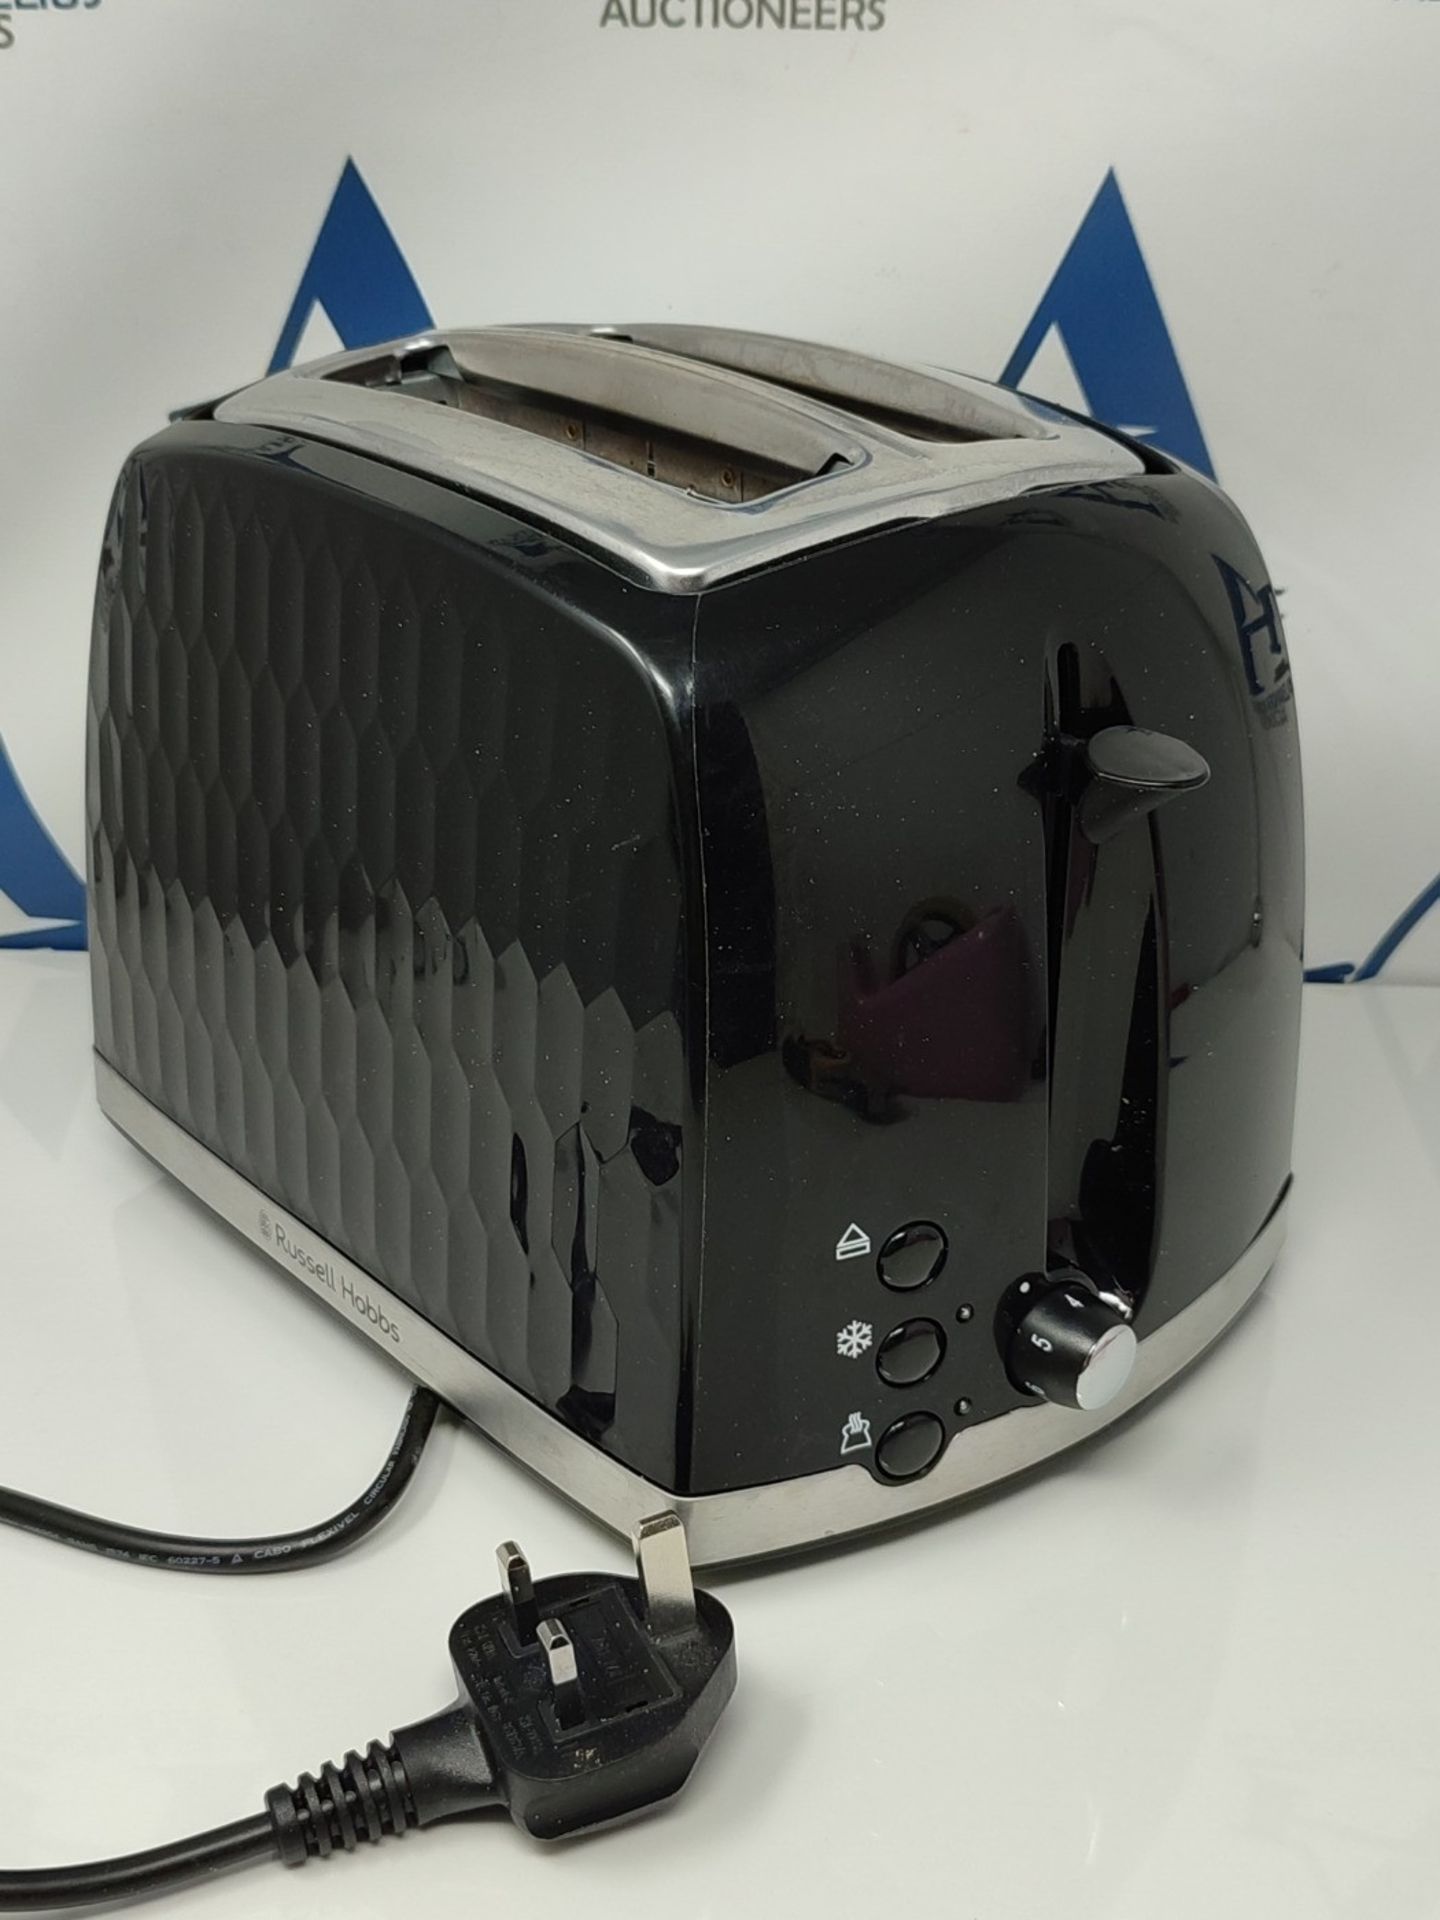 Russell Hobbs 26061 2 Slice Toaster - Contemporary Honeycomb Design with Extra Wide Sl - Image 2 of 2